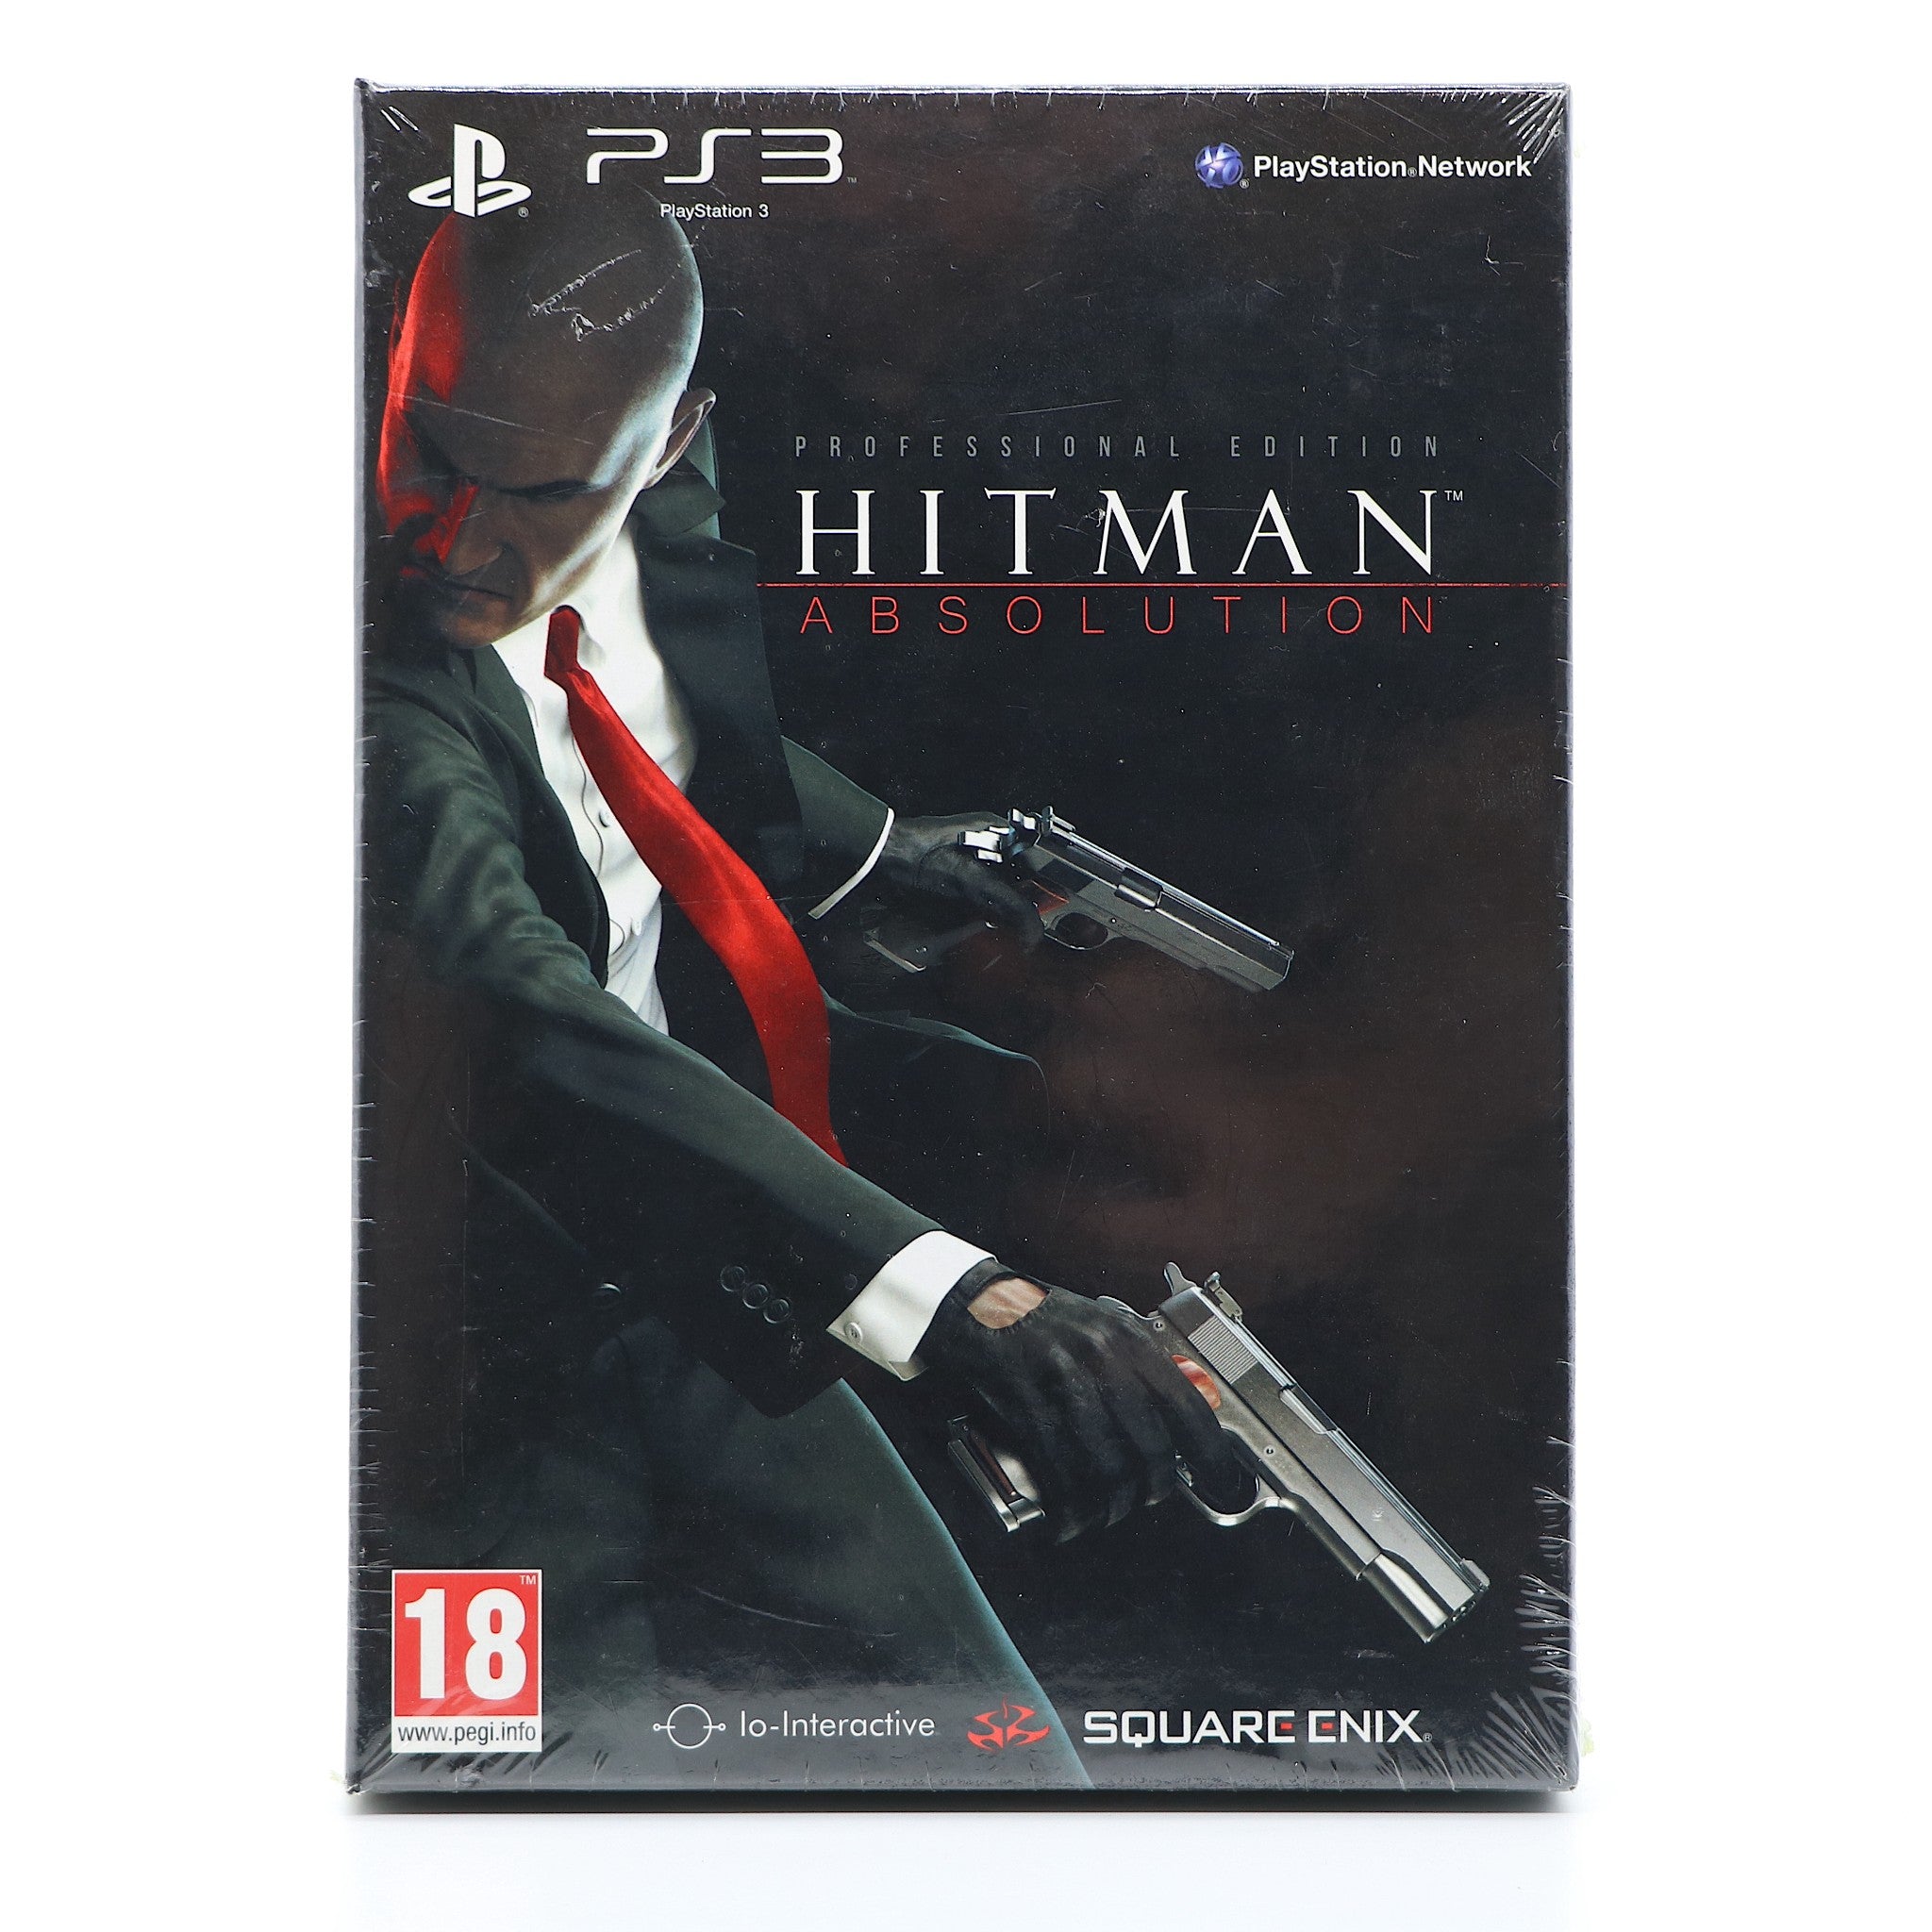 Hitman Absolution Professional Edition | Sony PS3 Game | New & Sealed